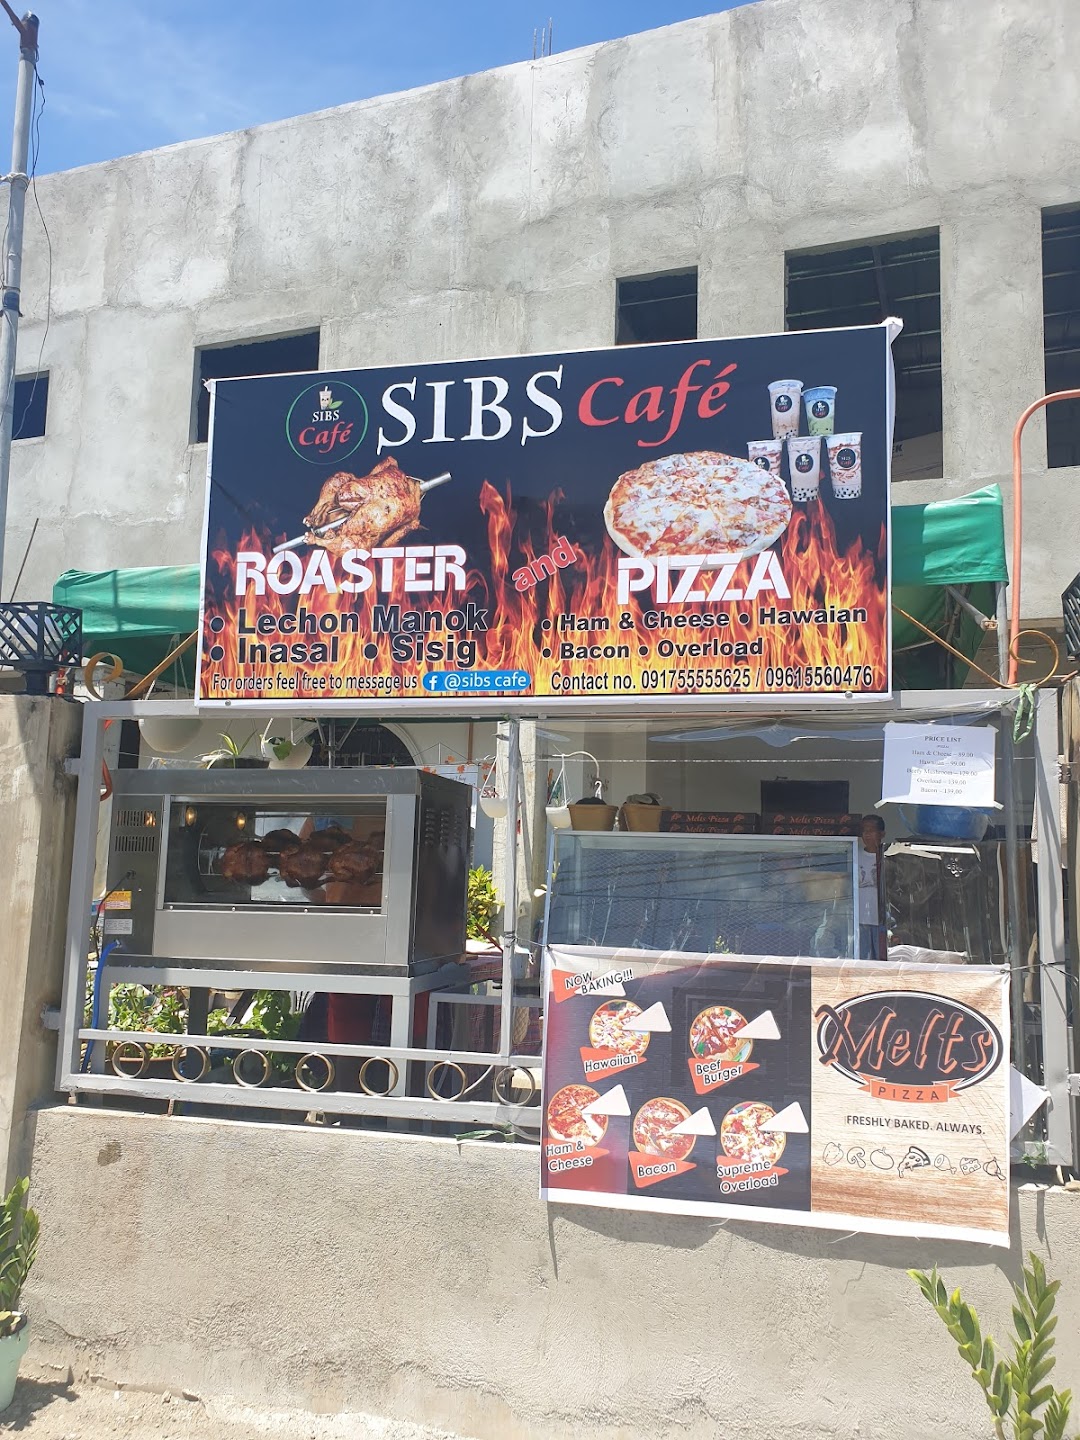 Sibs Caf - Roaster Chicken, Pizza, Milktea and Pasta